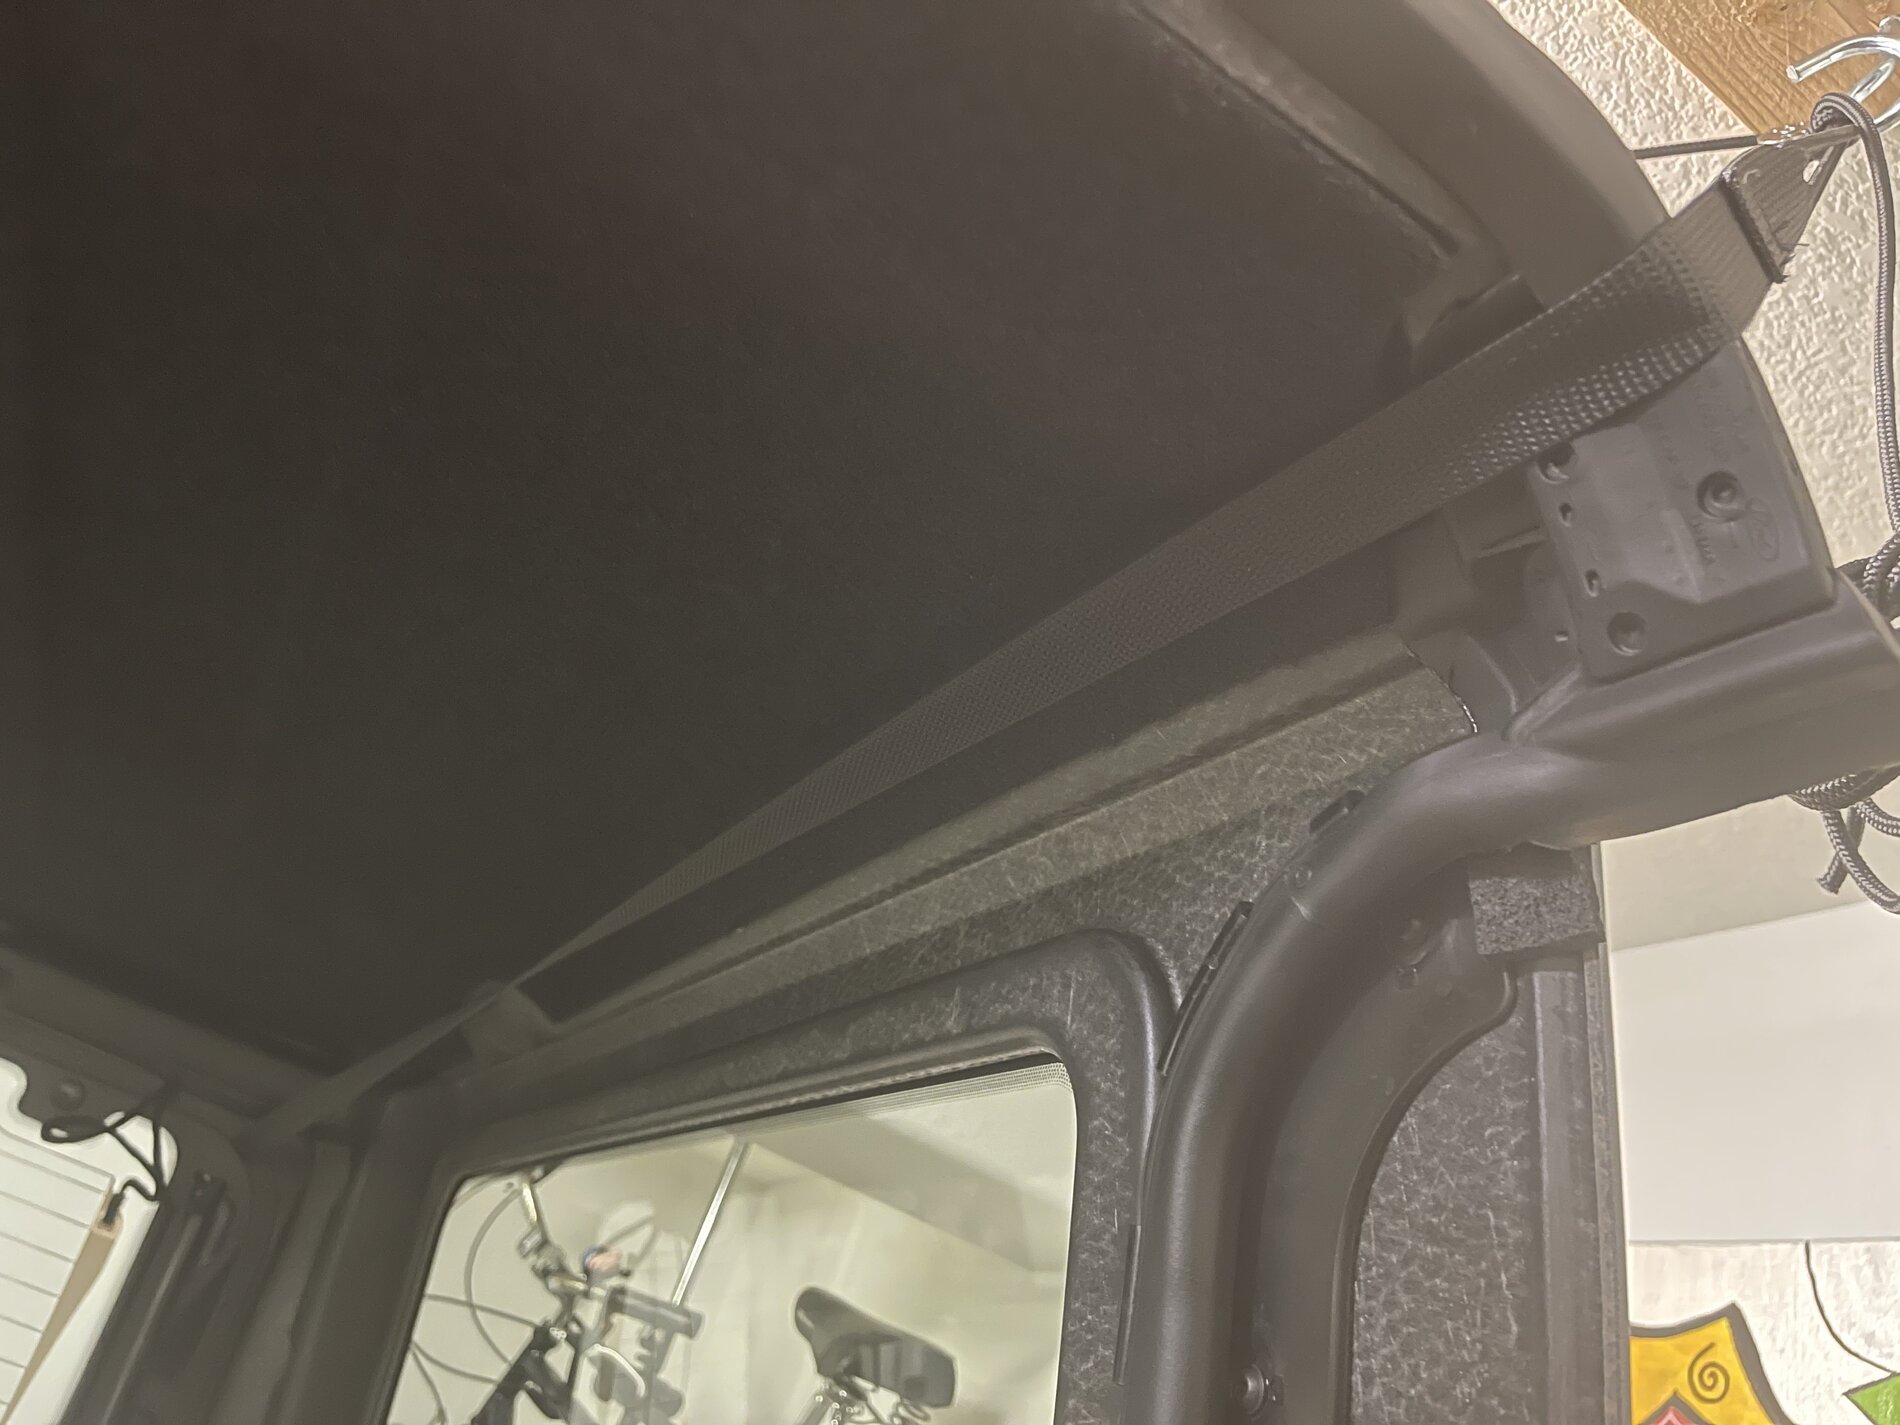 Ford Bronco MIC top installed incorrectly by factory (front bracket mounted on top screw rather than through it) 35E52236-9975-4430-AE52-DF0B3F35BCCA